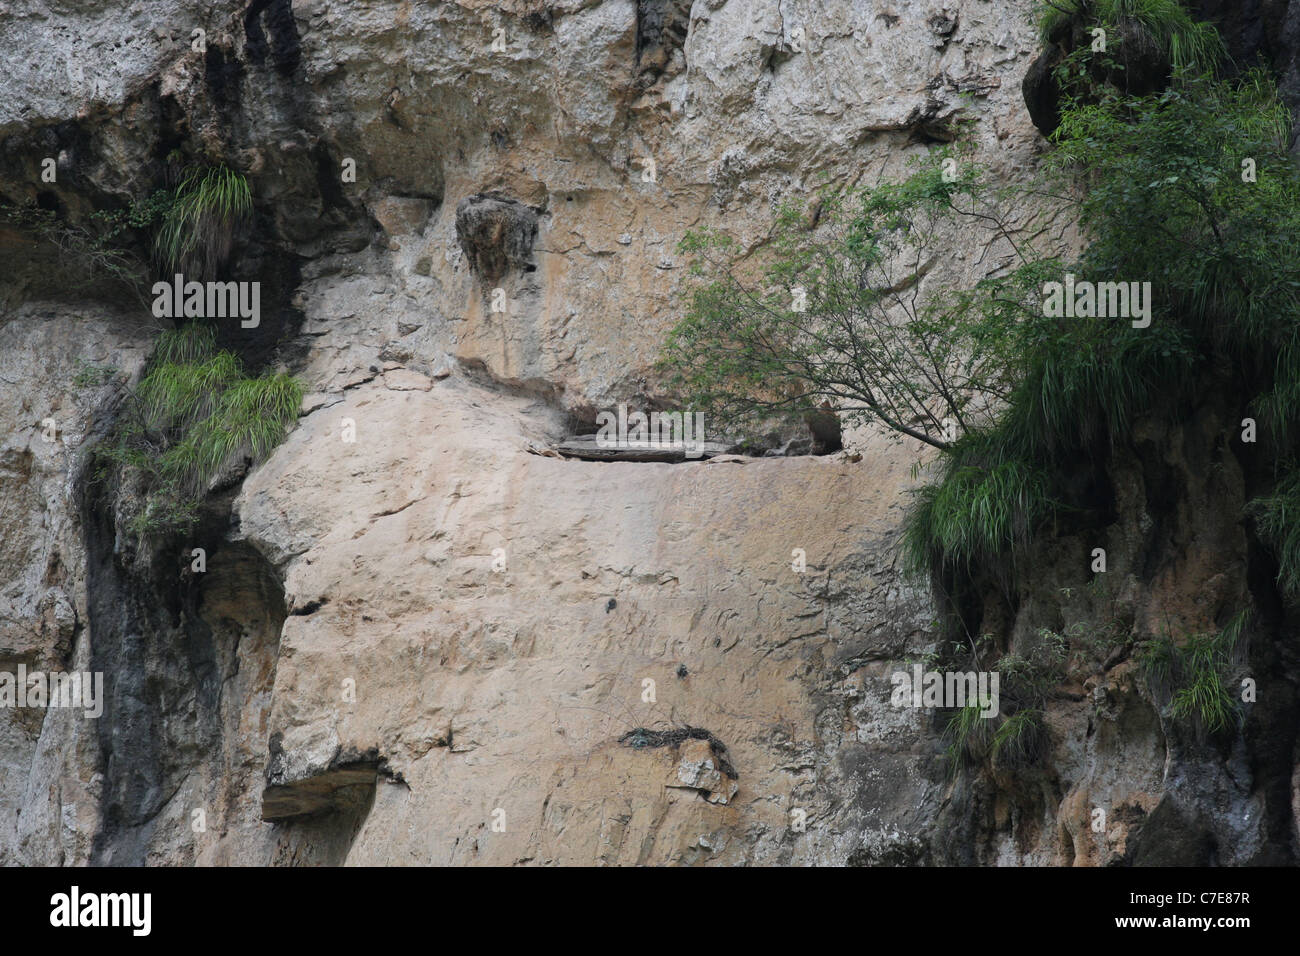 Hanging coffins, in MIsty Gorge, Lesser Three Gorges, China Stock Photo